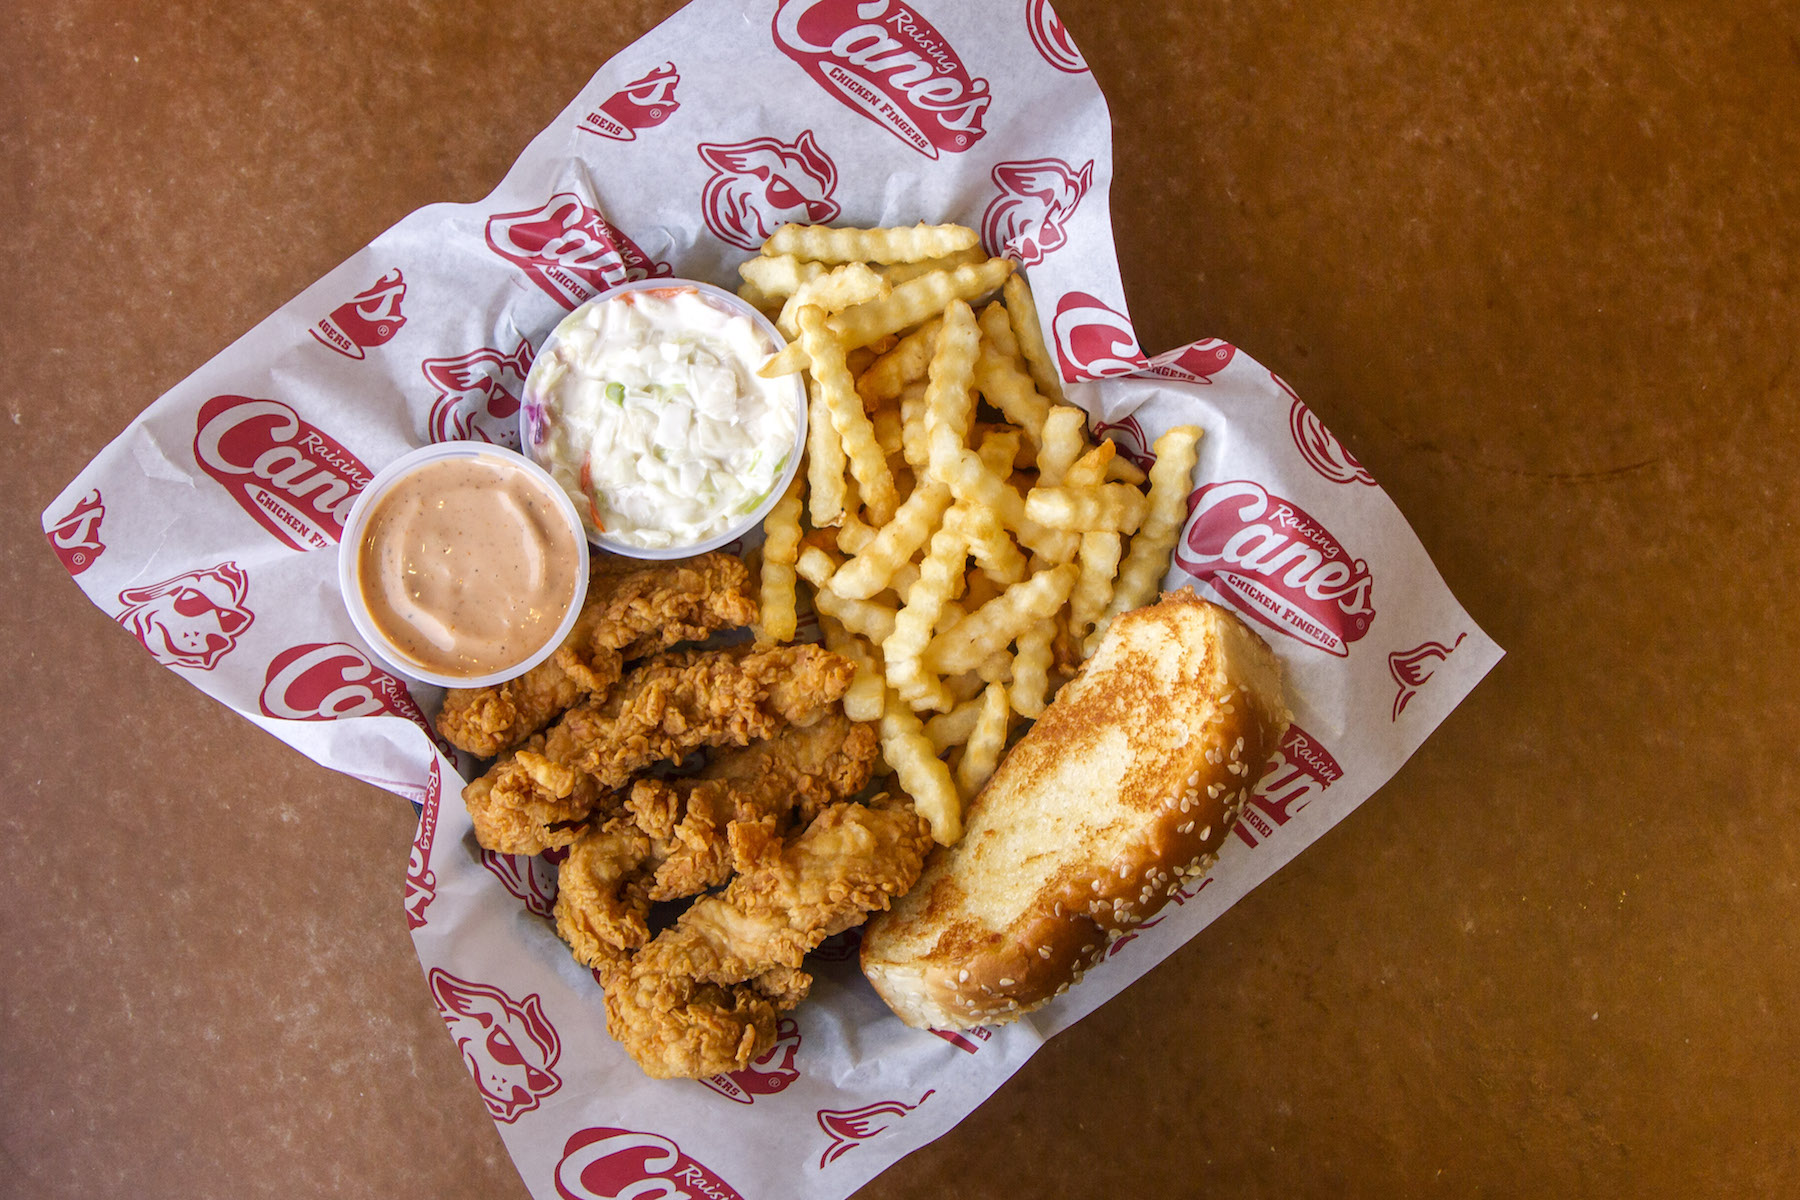 Raising Cane's looking for workers to staff new restaurant in Denton